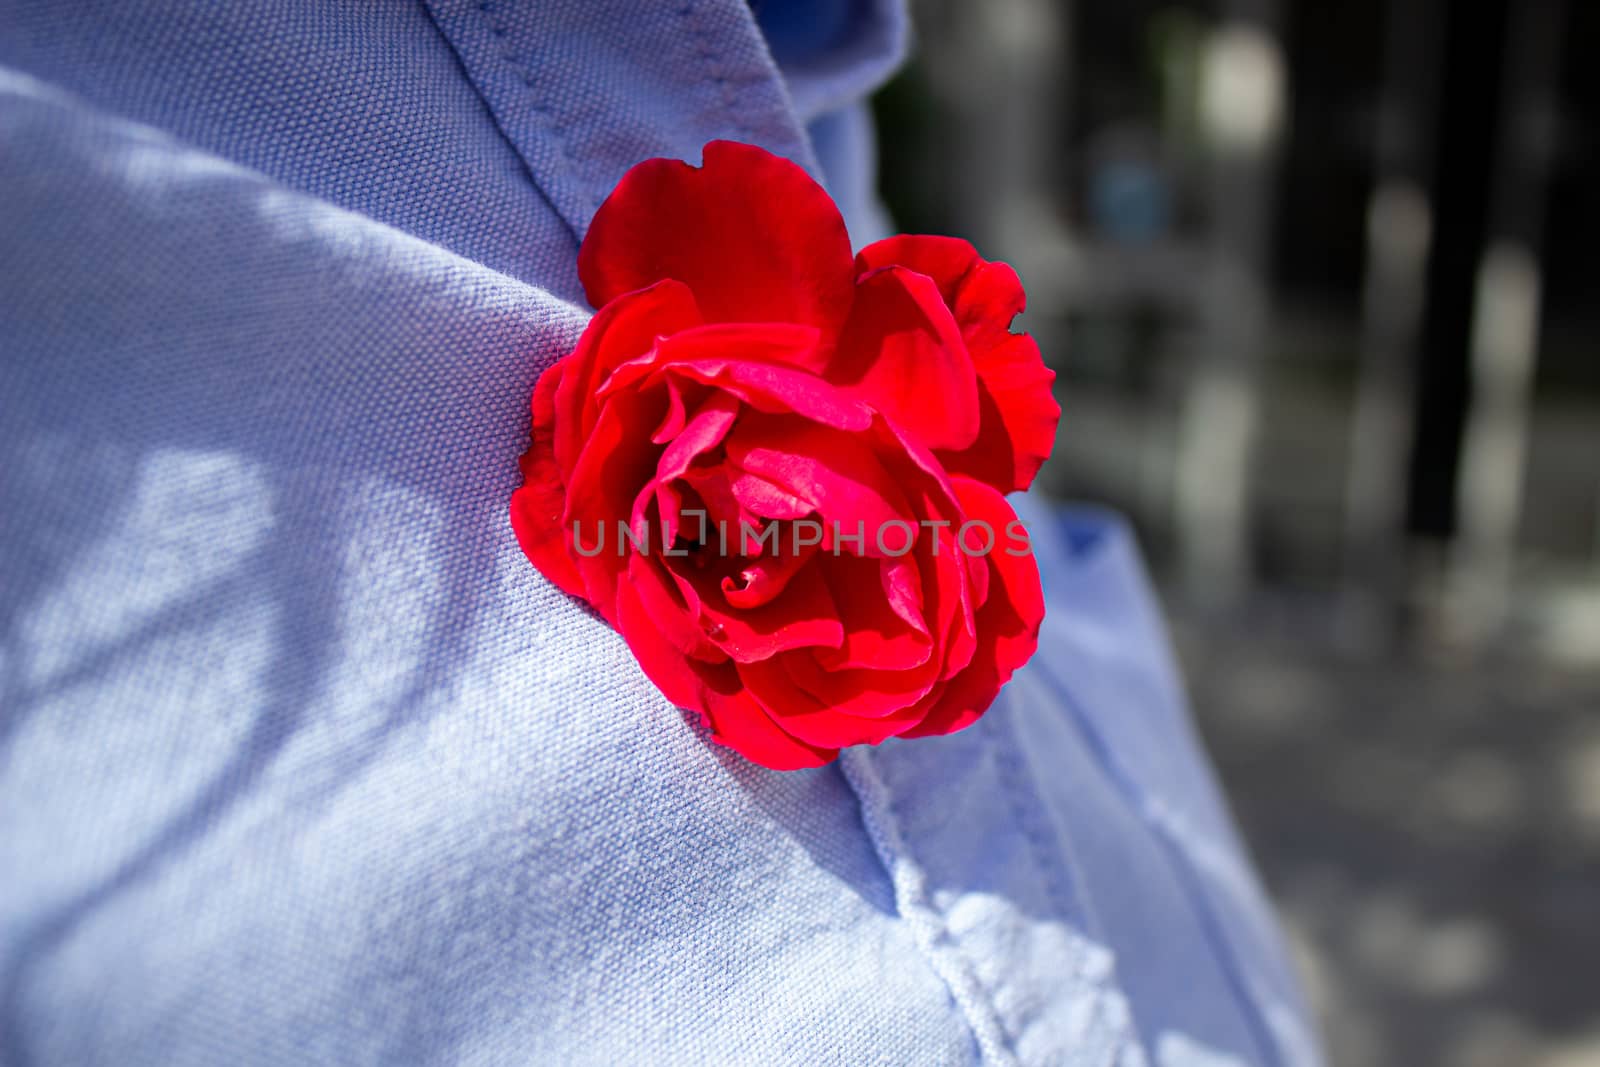 Red rose on background of blue denim shirt. still life with rose flower. by AnatoliiFoto